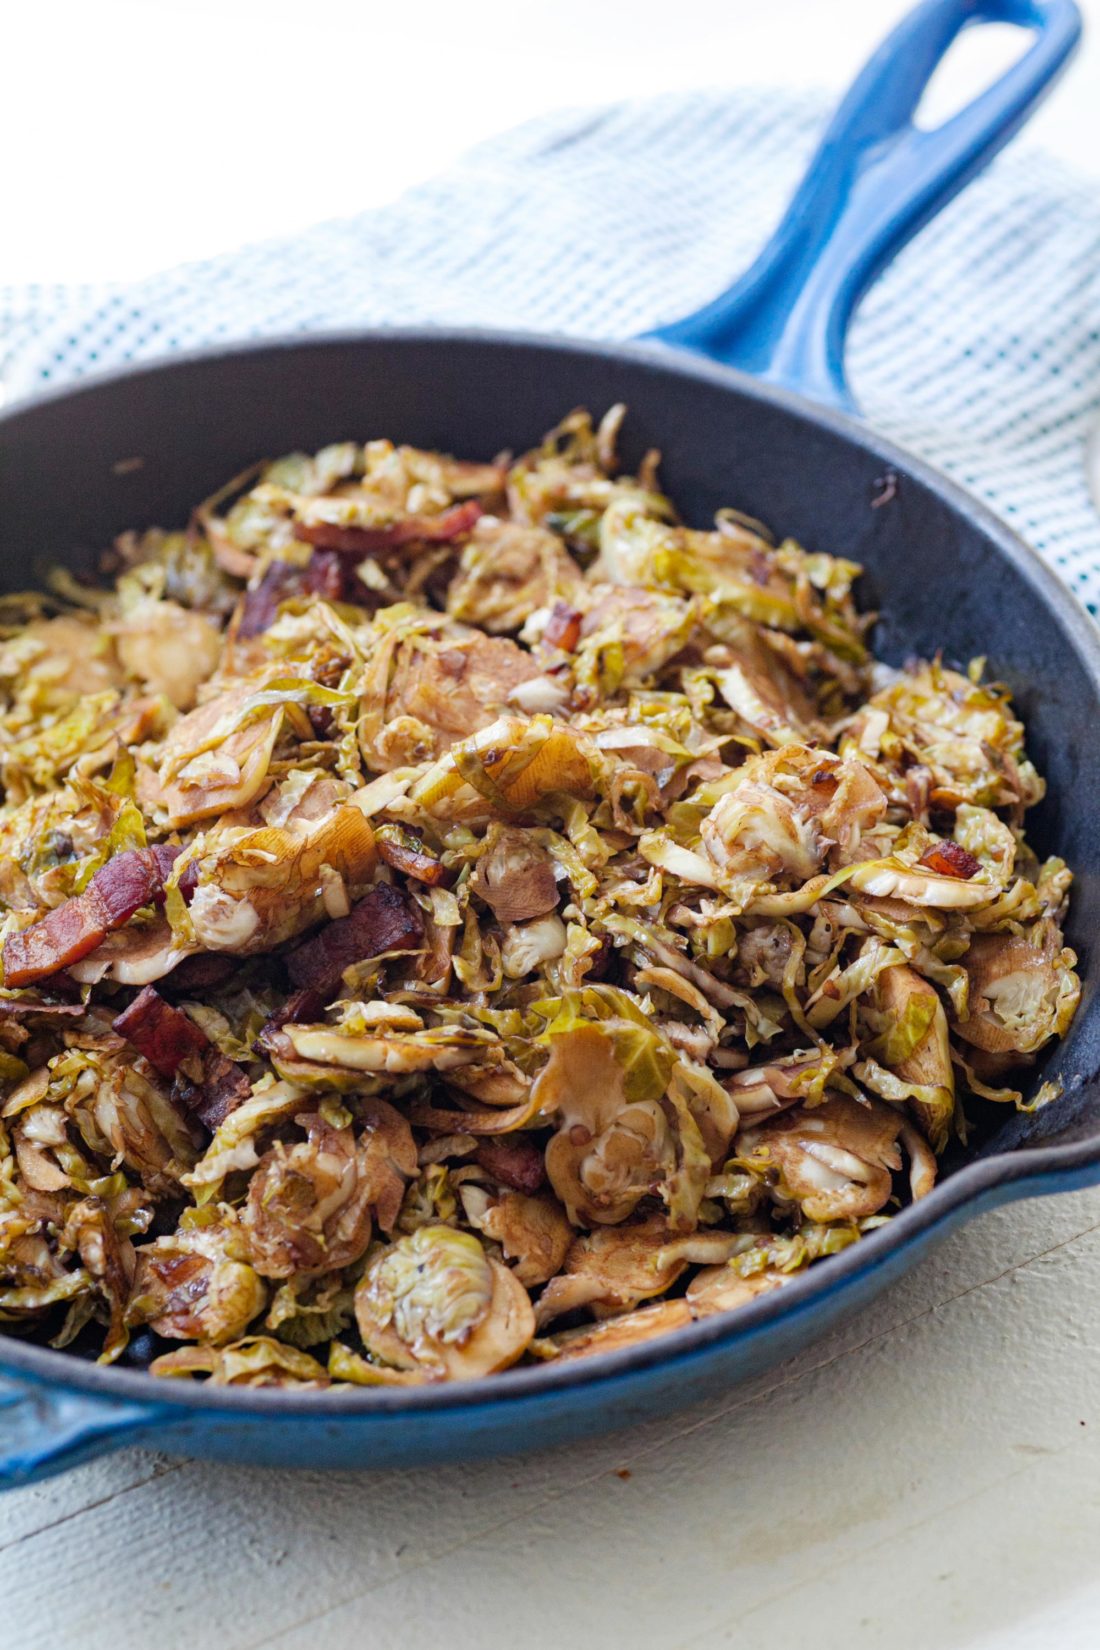 Balsamic Glazed Shredded Brussels Sprouts with Bacon